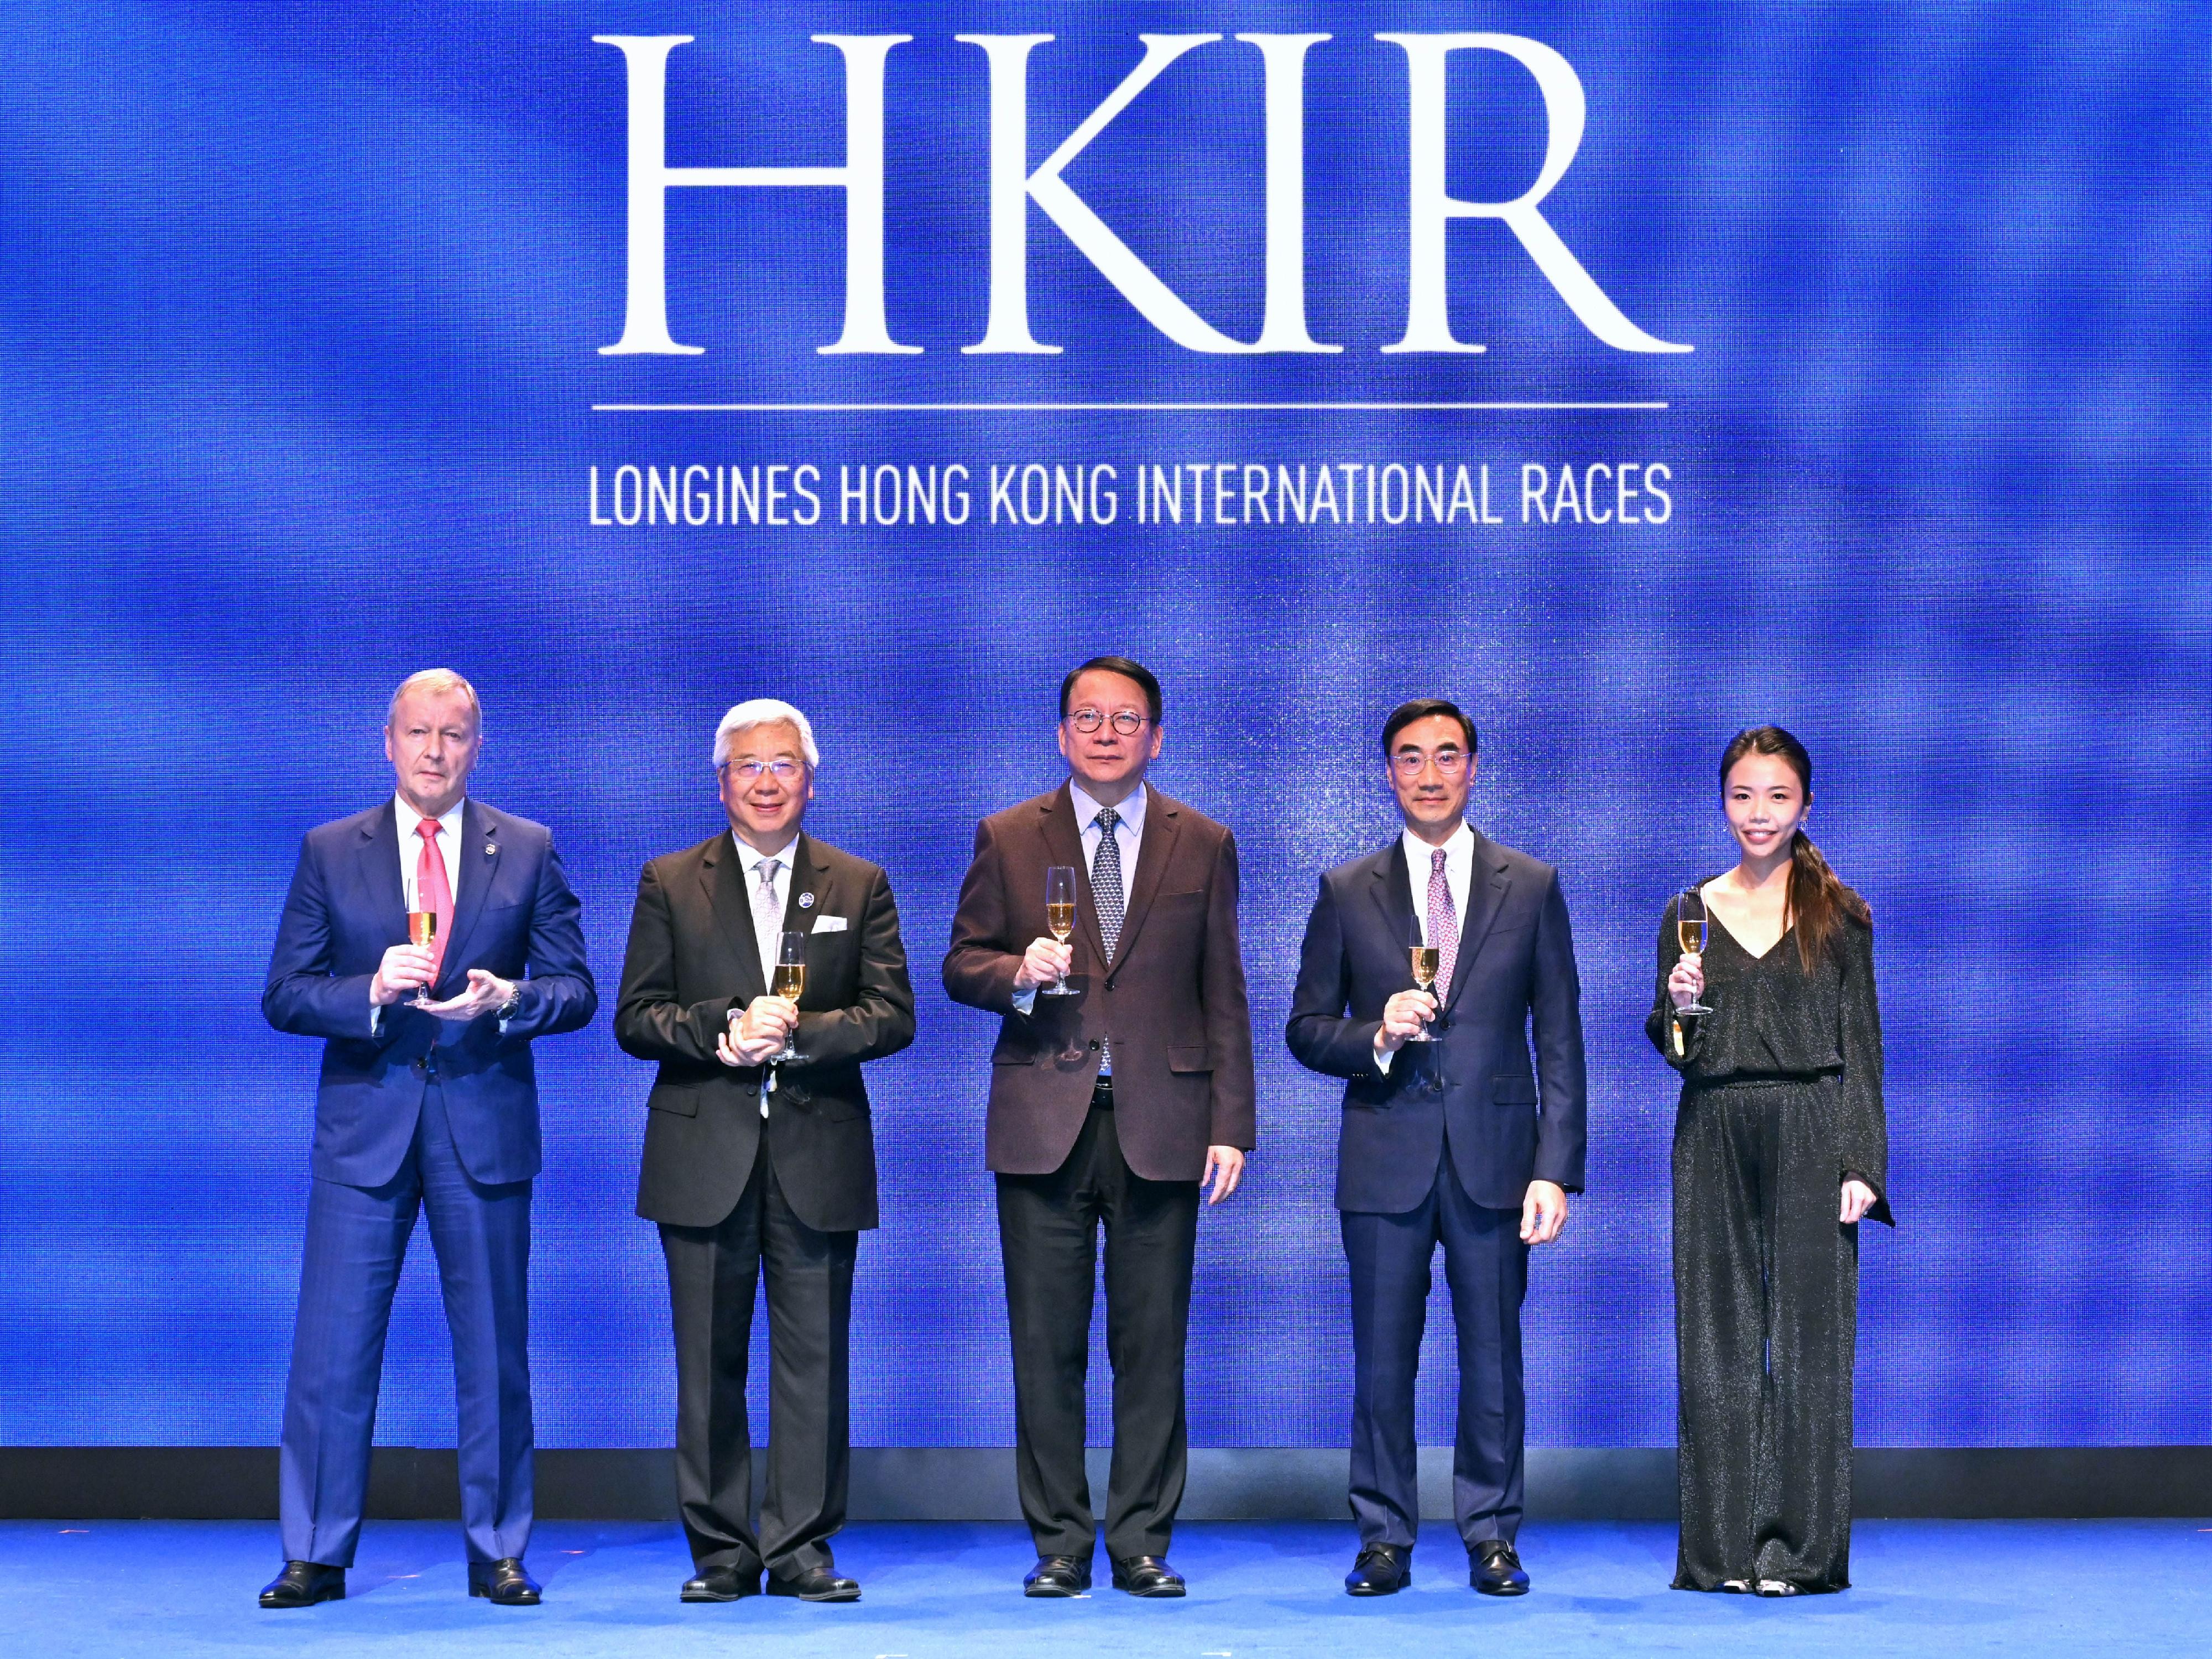 The Chief Secretary for Administration, Mr Chan Kwok-ki, attended the LONGINES Hong Kong International Races Gala Dinner today (December 9). Photo shows (from left) the Chief Executive Officer of The Hong Kong Jockey Club, Mr Winfried Engelbrecht-Bresges; the Deputy Chairman of The Hong Kong Jockey Club, Dr Eric Li; Mr Chan ; the Chairman of The Hong Kong Jockey Club, Mr Michael Lee; and the Vice President of LONGINES Hong Kong and Macau, Ms Cecilia Kwok, at the event.